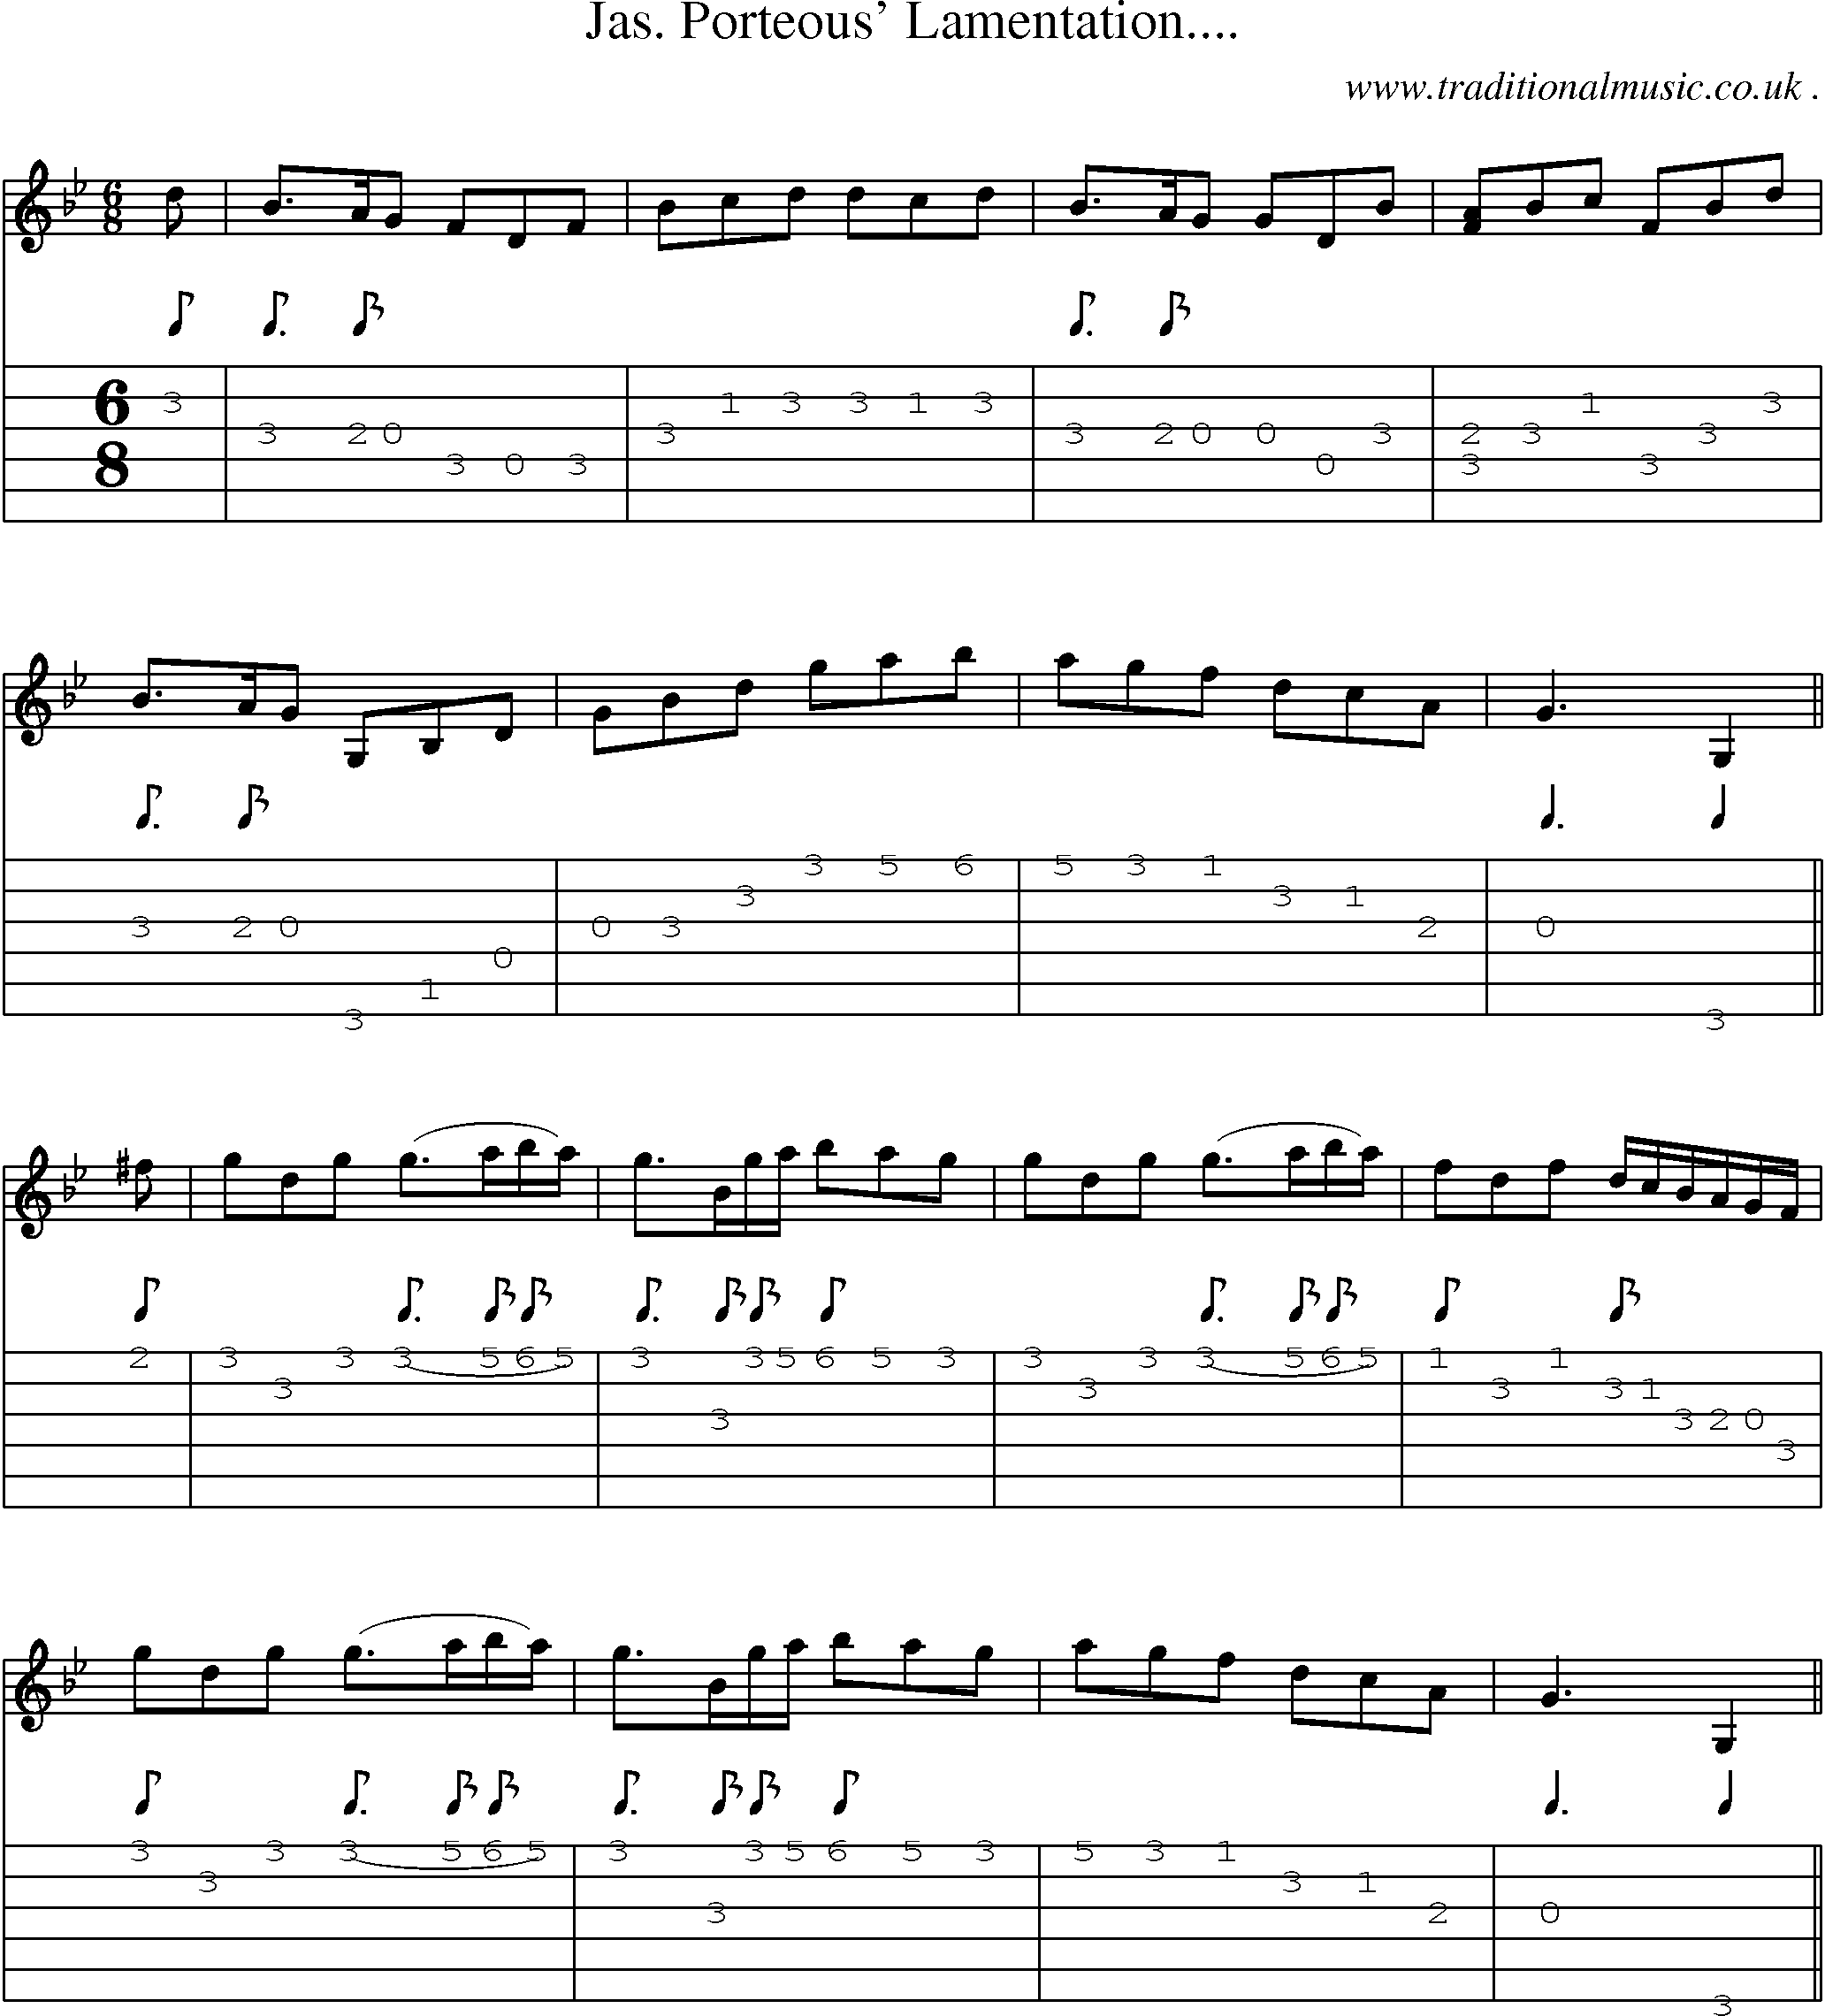 Sheet-Music and Guitar Tabs for Jas Porteous Lamentation